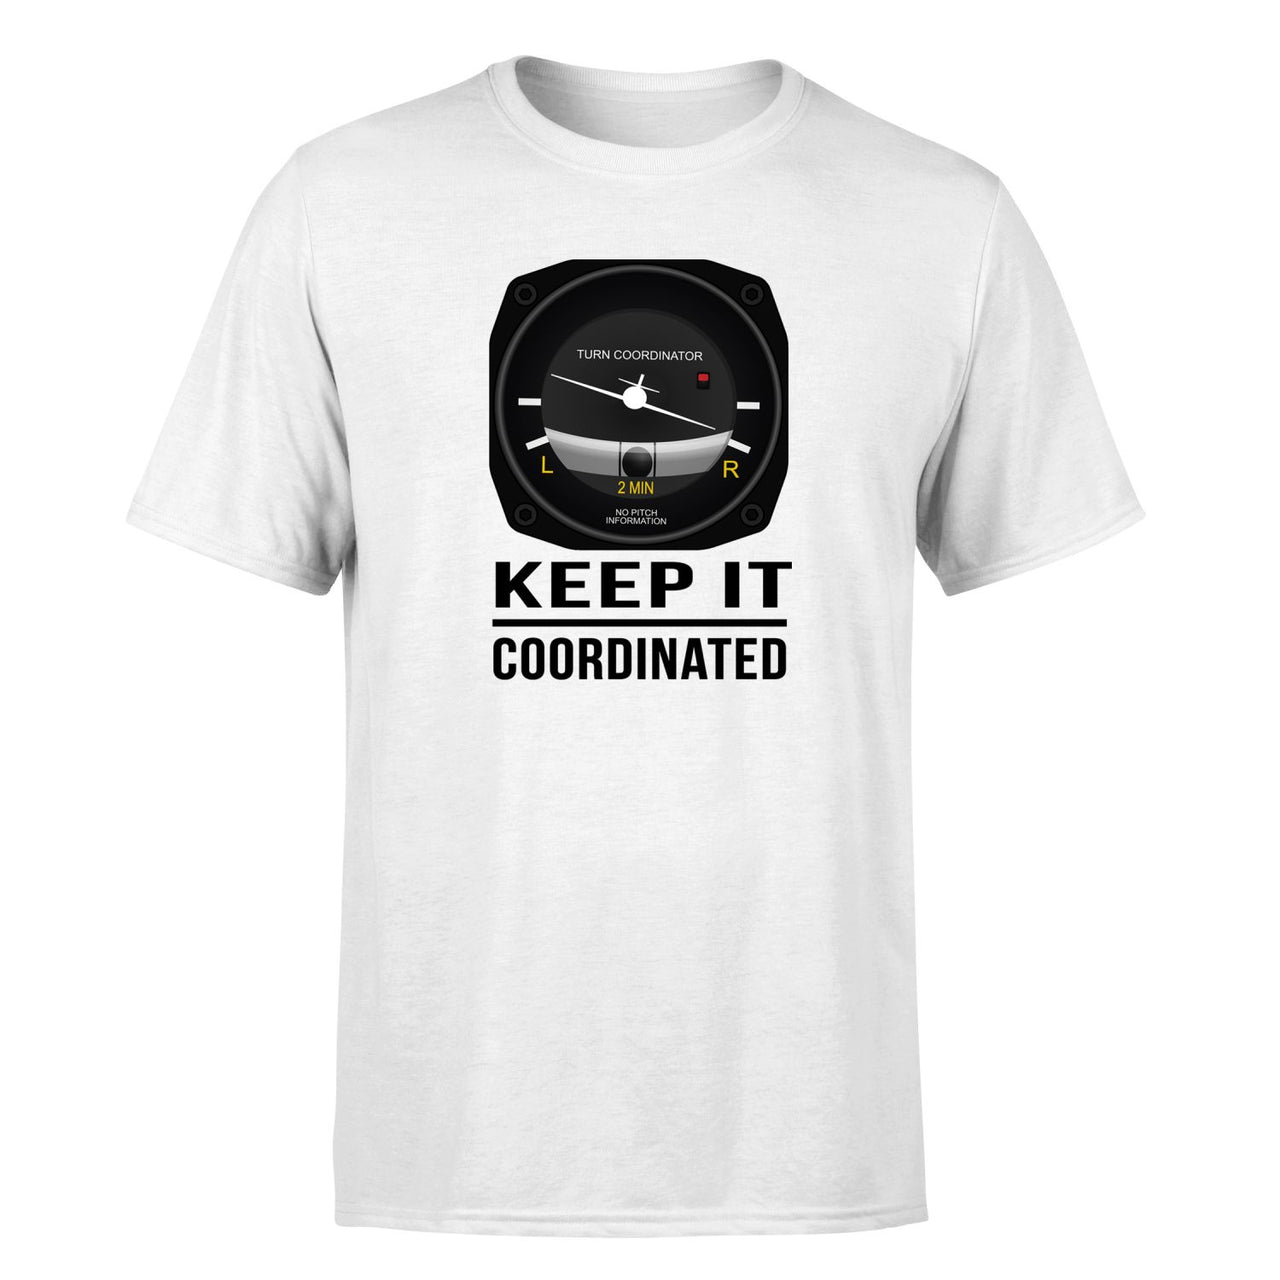 Keep It Coordinated Designed T-Shirts